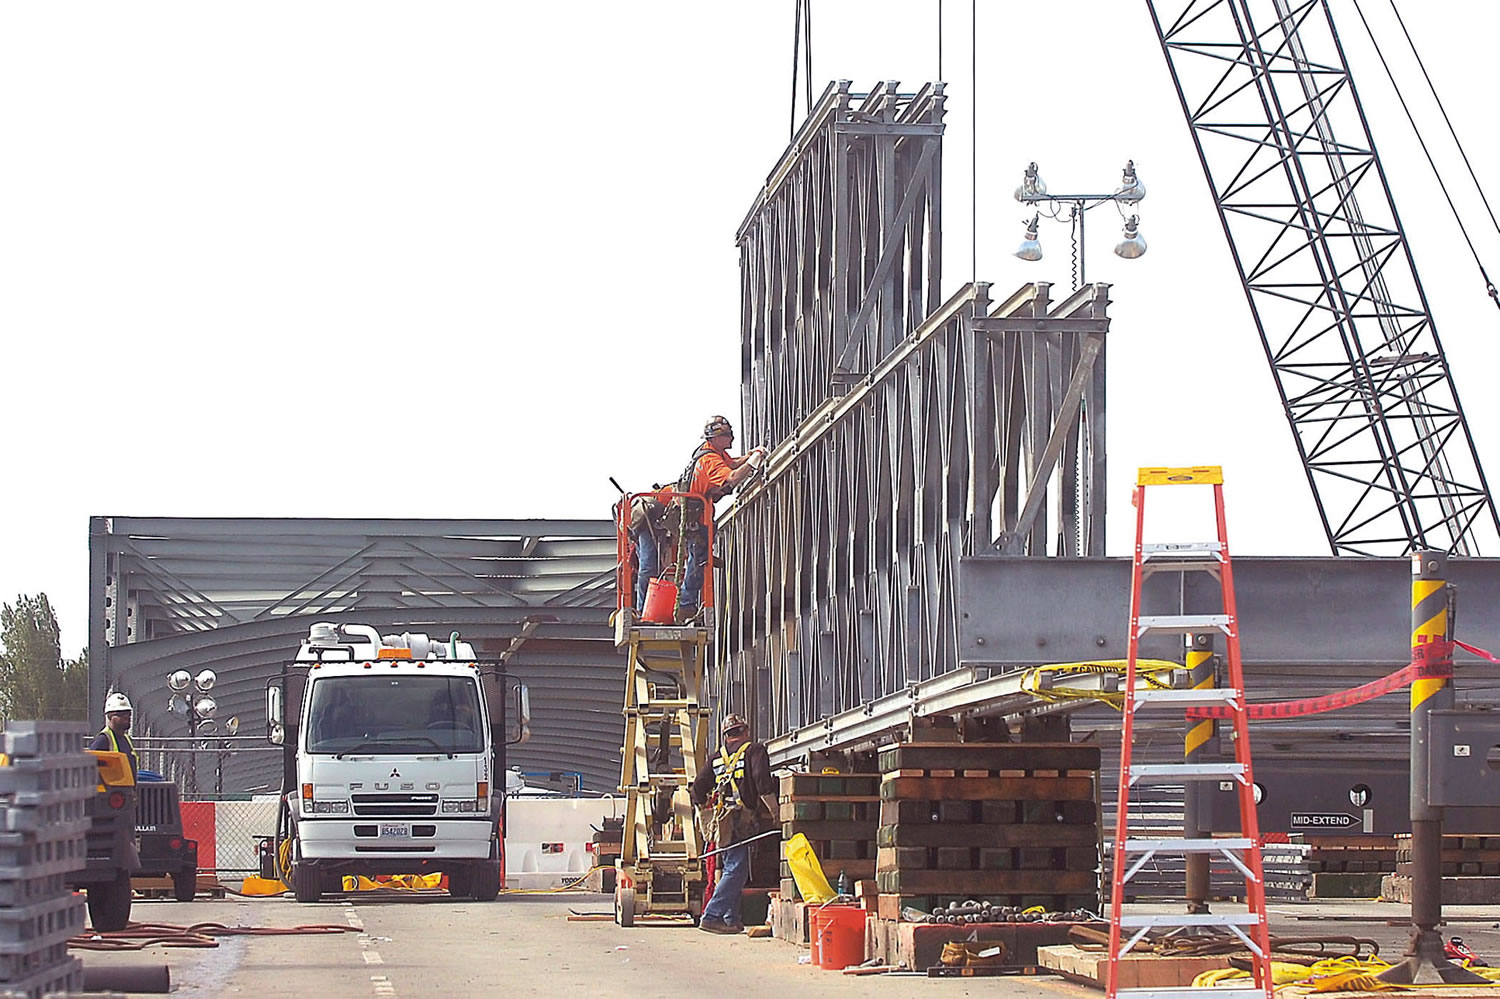 Construction crews on the north side of the fallen Skagit River Bridge work Monday to assemble girder sections for a temporary bridge span.